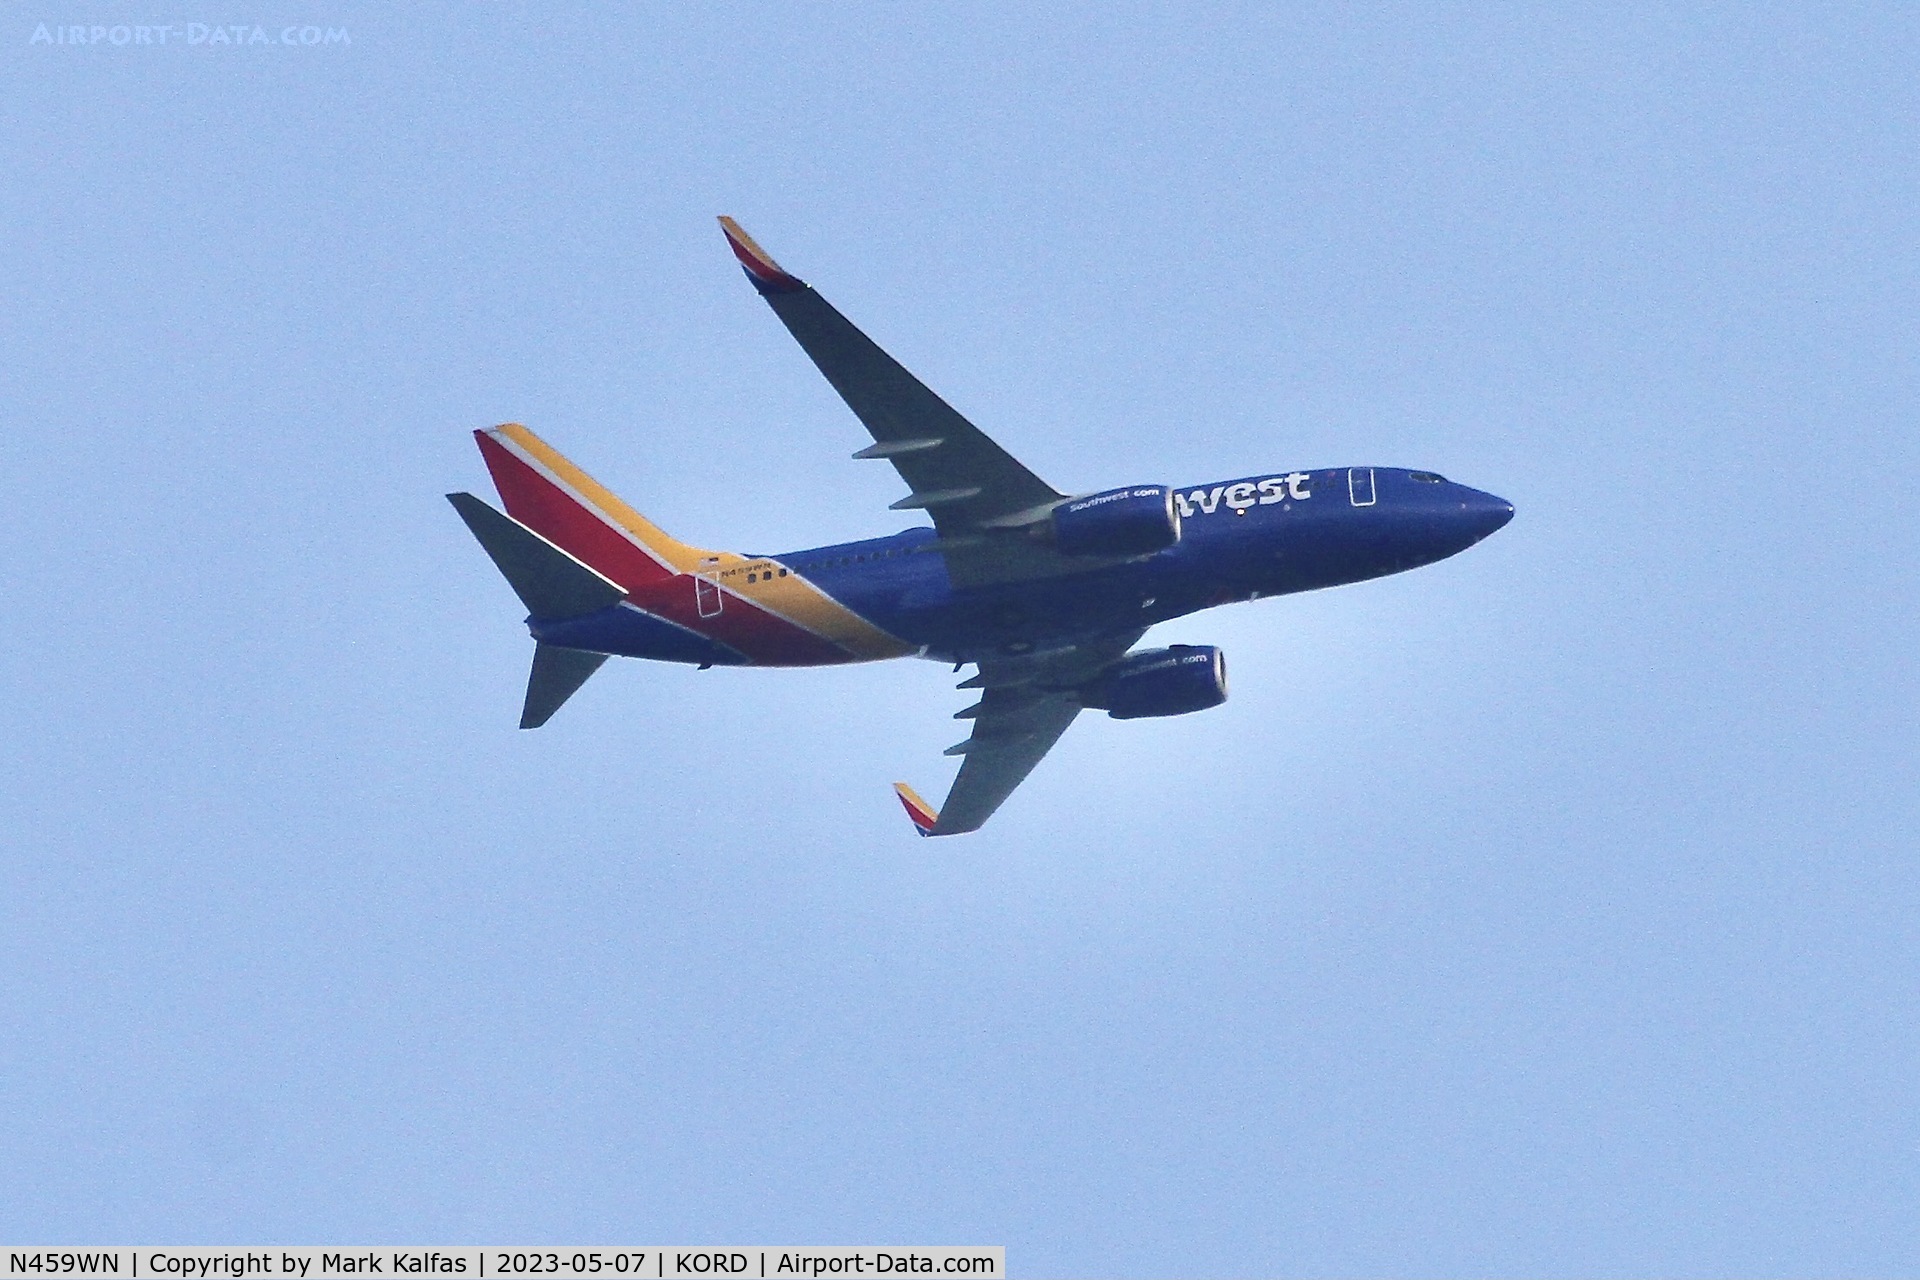 N459WN, 2004 Boeing 737-7H4 C/N 32497, SouthWest B737, N459WN operating as SWA1168 from BNA to ORD, on approach O'Hare